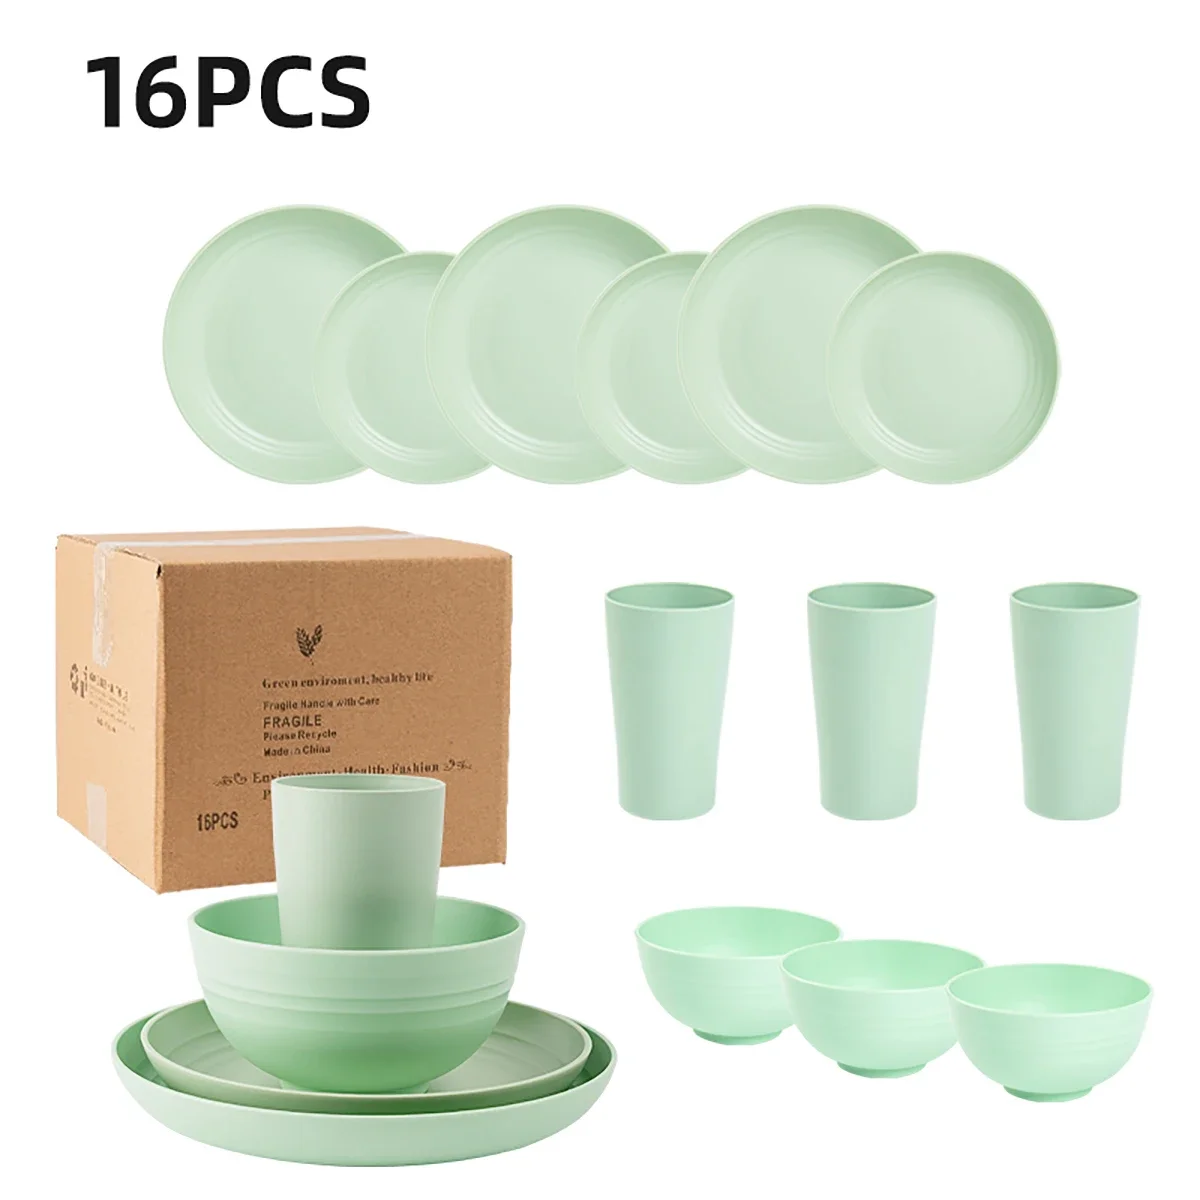 16Pcs Wheat Straw Cutlery Sets Green Bowl Saucers Plate Sets Portable Picnic Knife Fork Black Dinnerware Camping Full Tableware